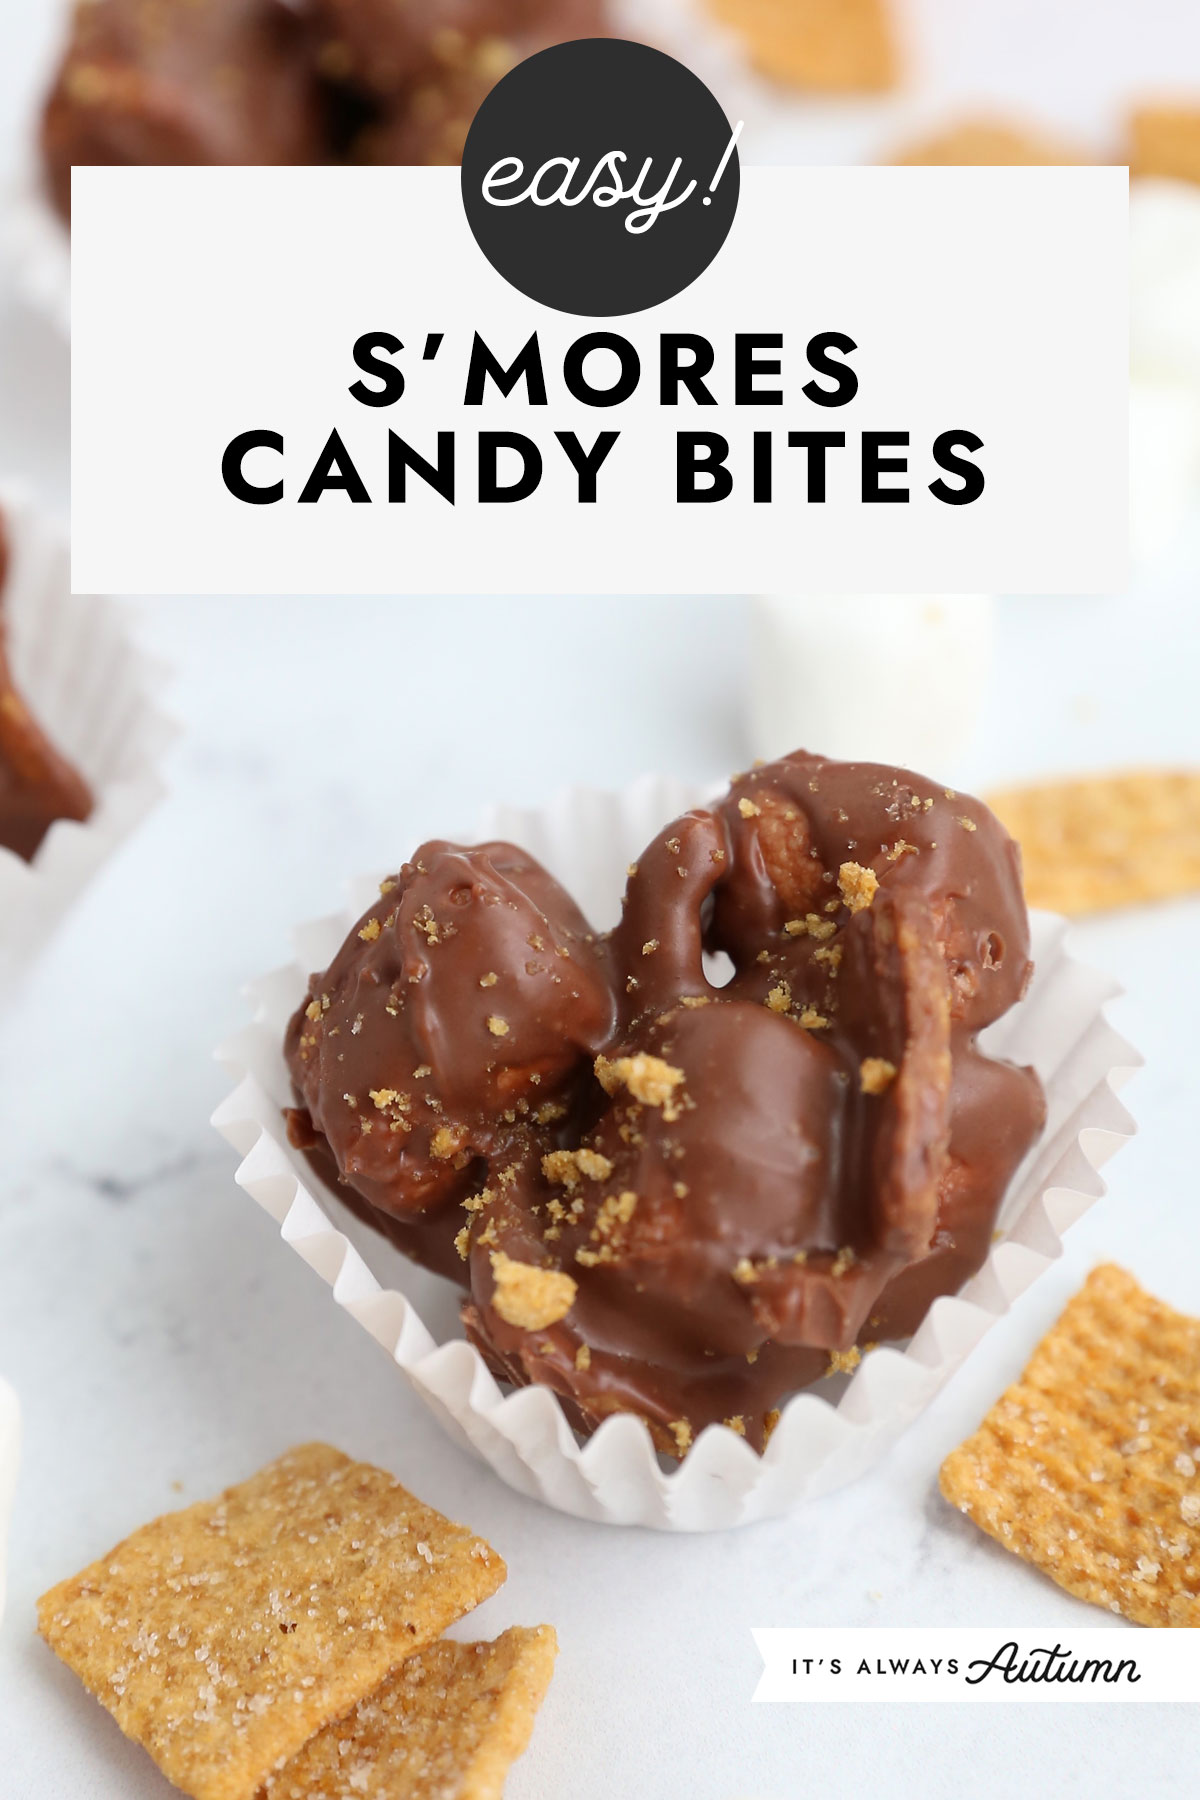 easy! S'mores candy bite